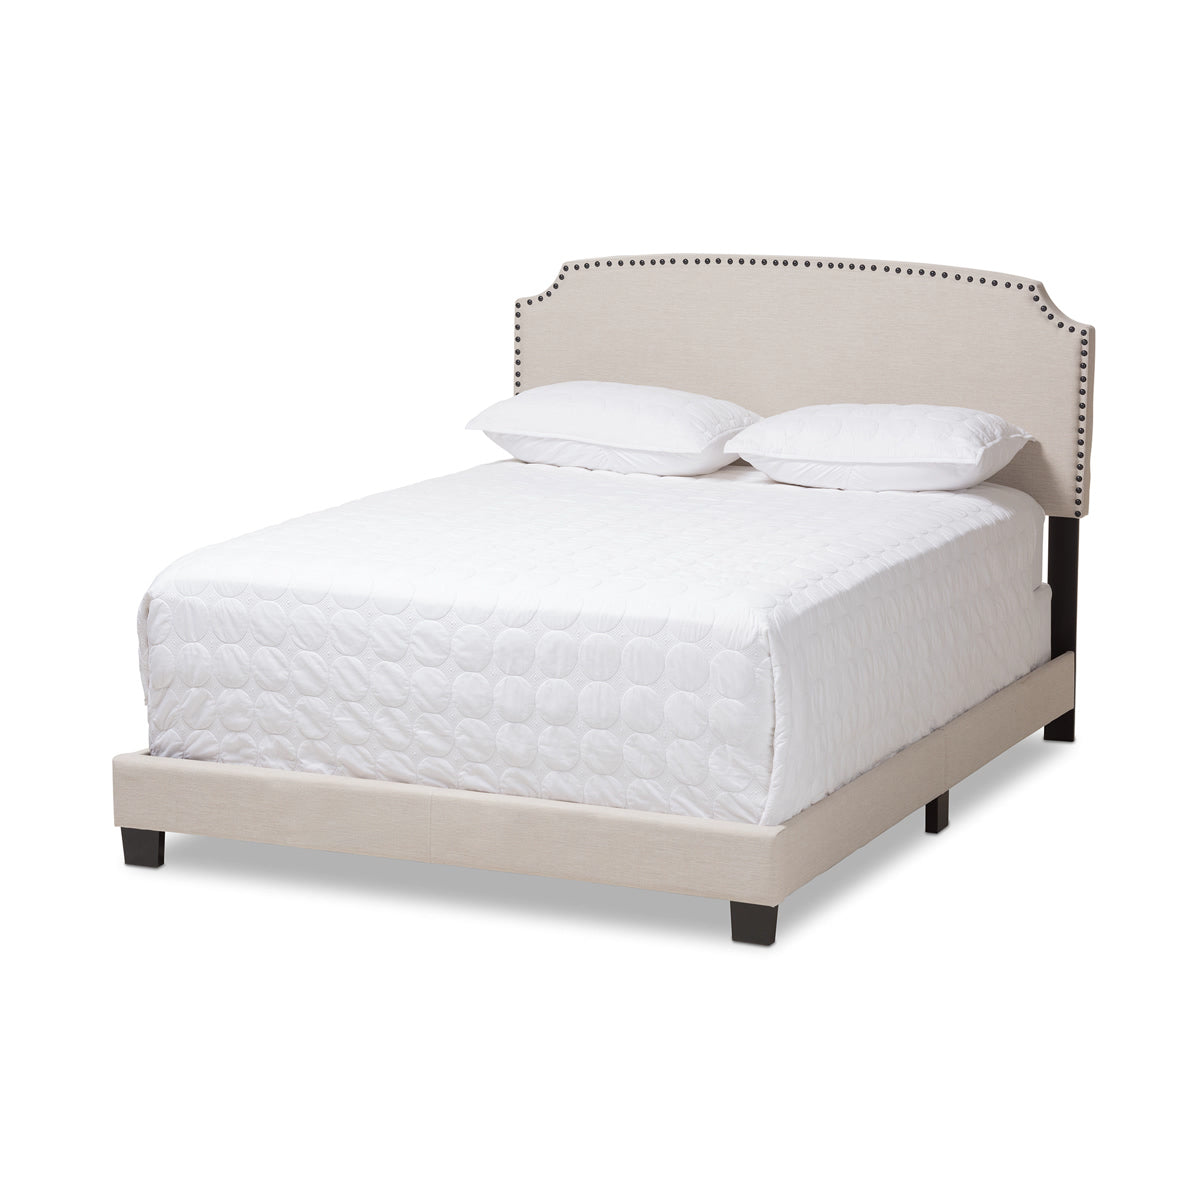 Baxton Studio Odette Modern and Contemporary Light Beige Fabric Upholstered King Size Bed Baxton Studio-0-Minimal And Modern - 1